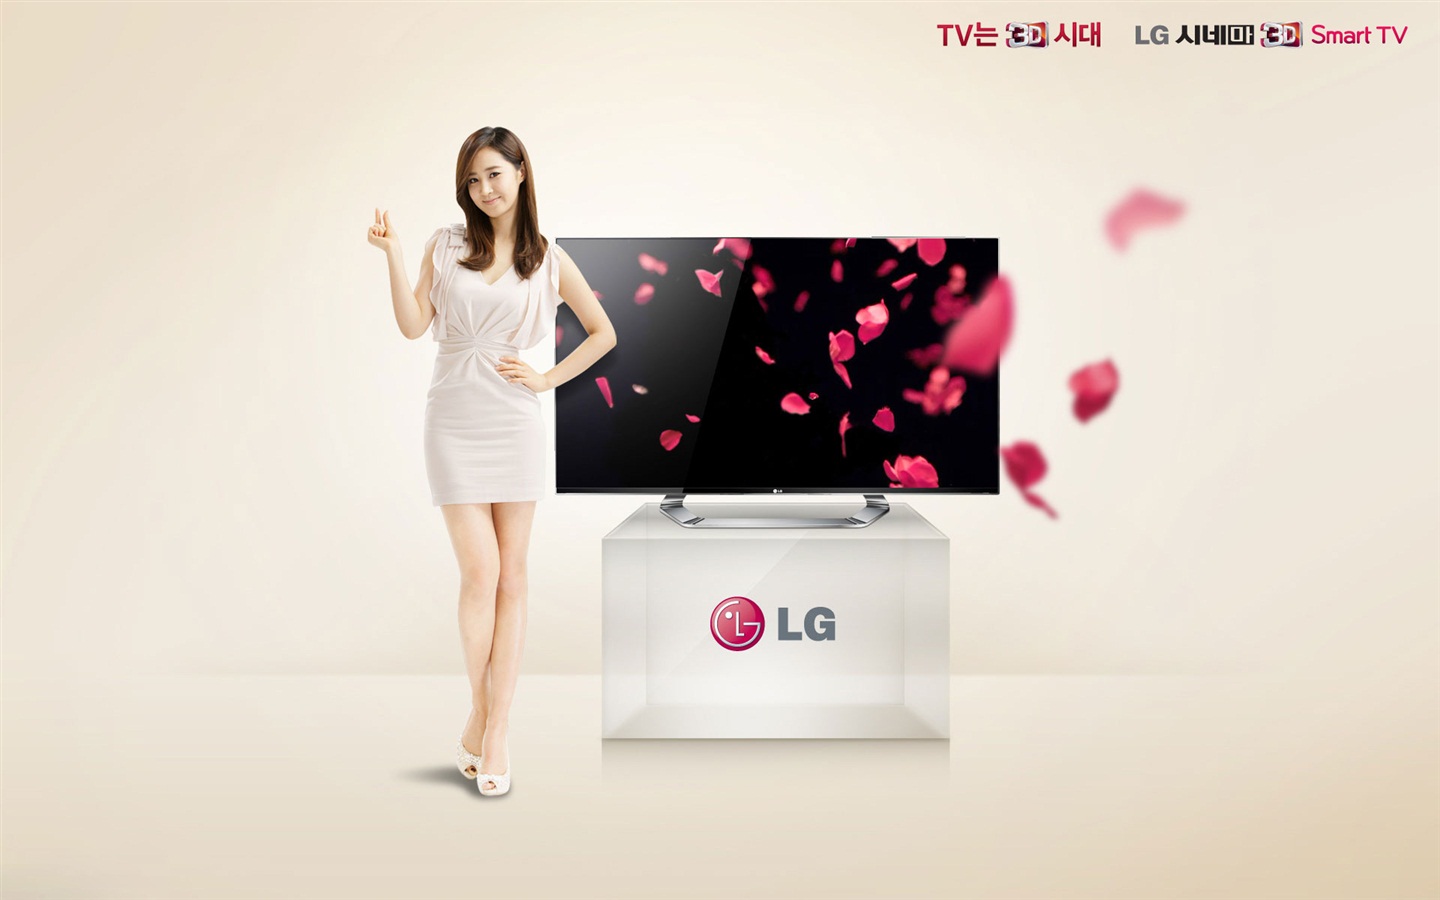 Girls Generation ACE and LG endorsements ads HD wallpapers #17 - 1440x900